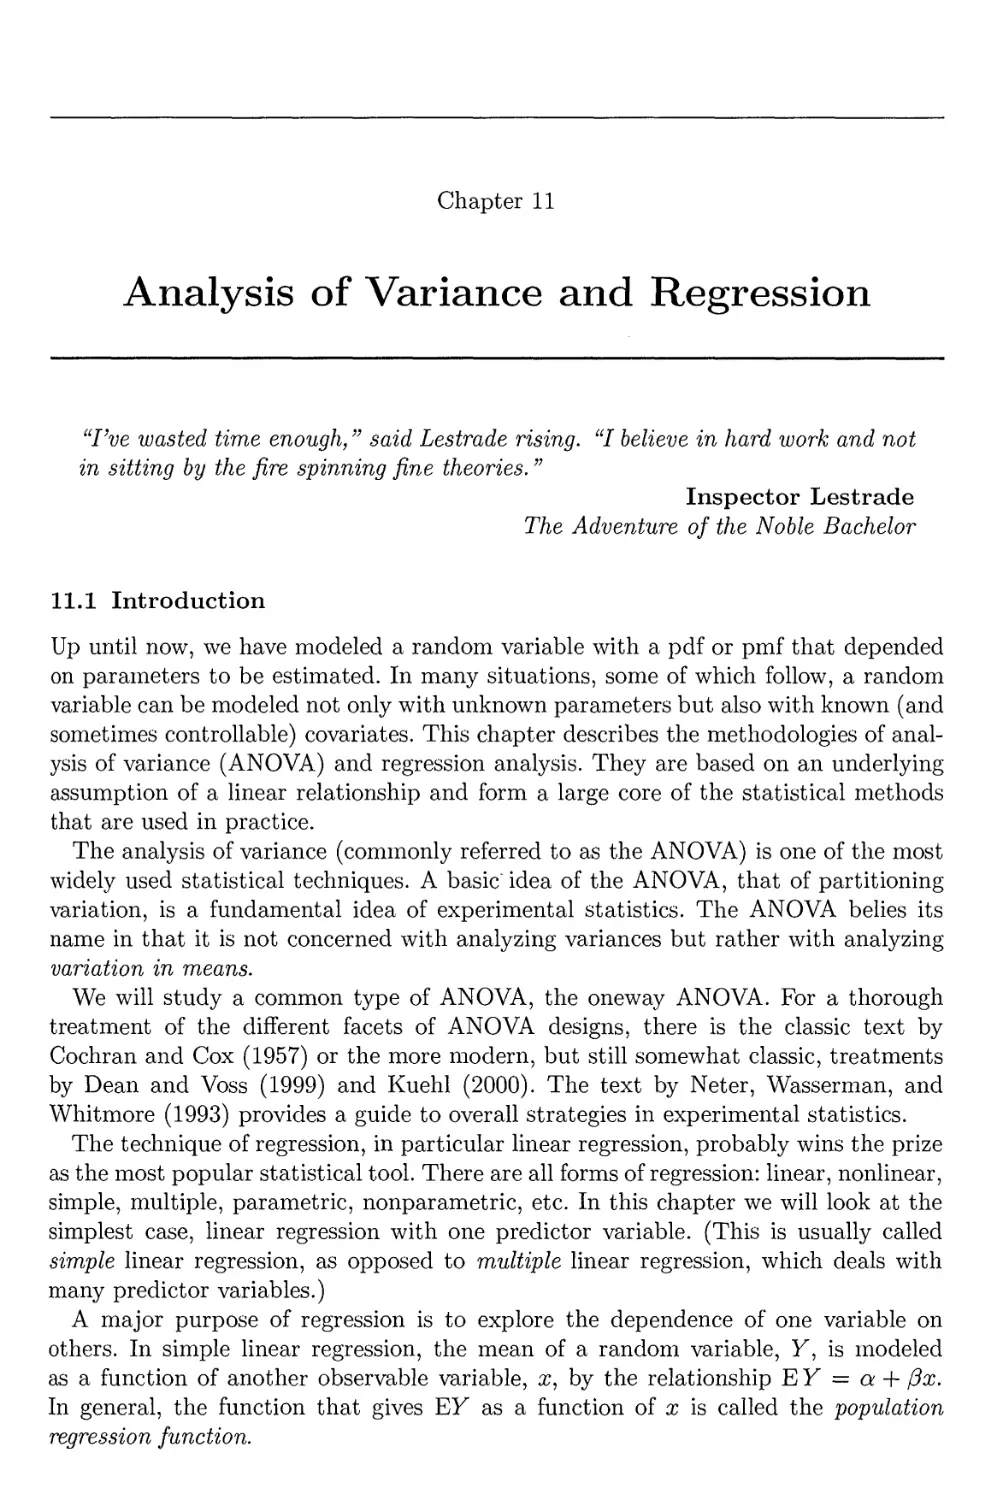 11. Analysis of Variance and Regression